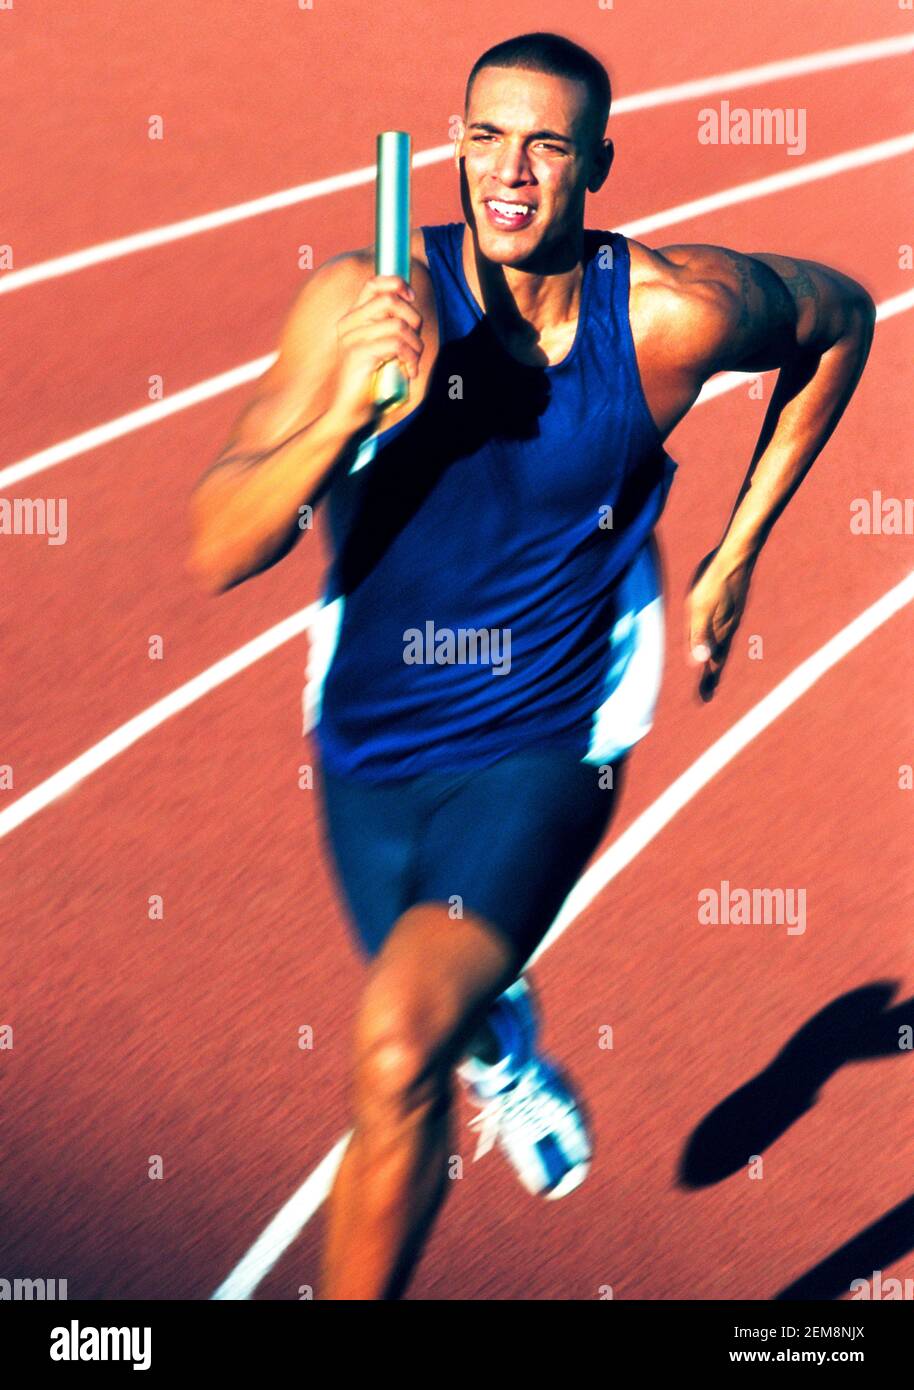 An athlete sprinting with relay baton in hand. Stock Photo